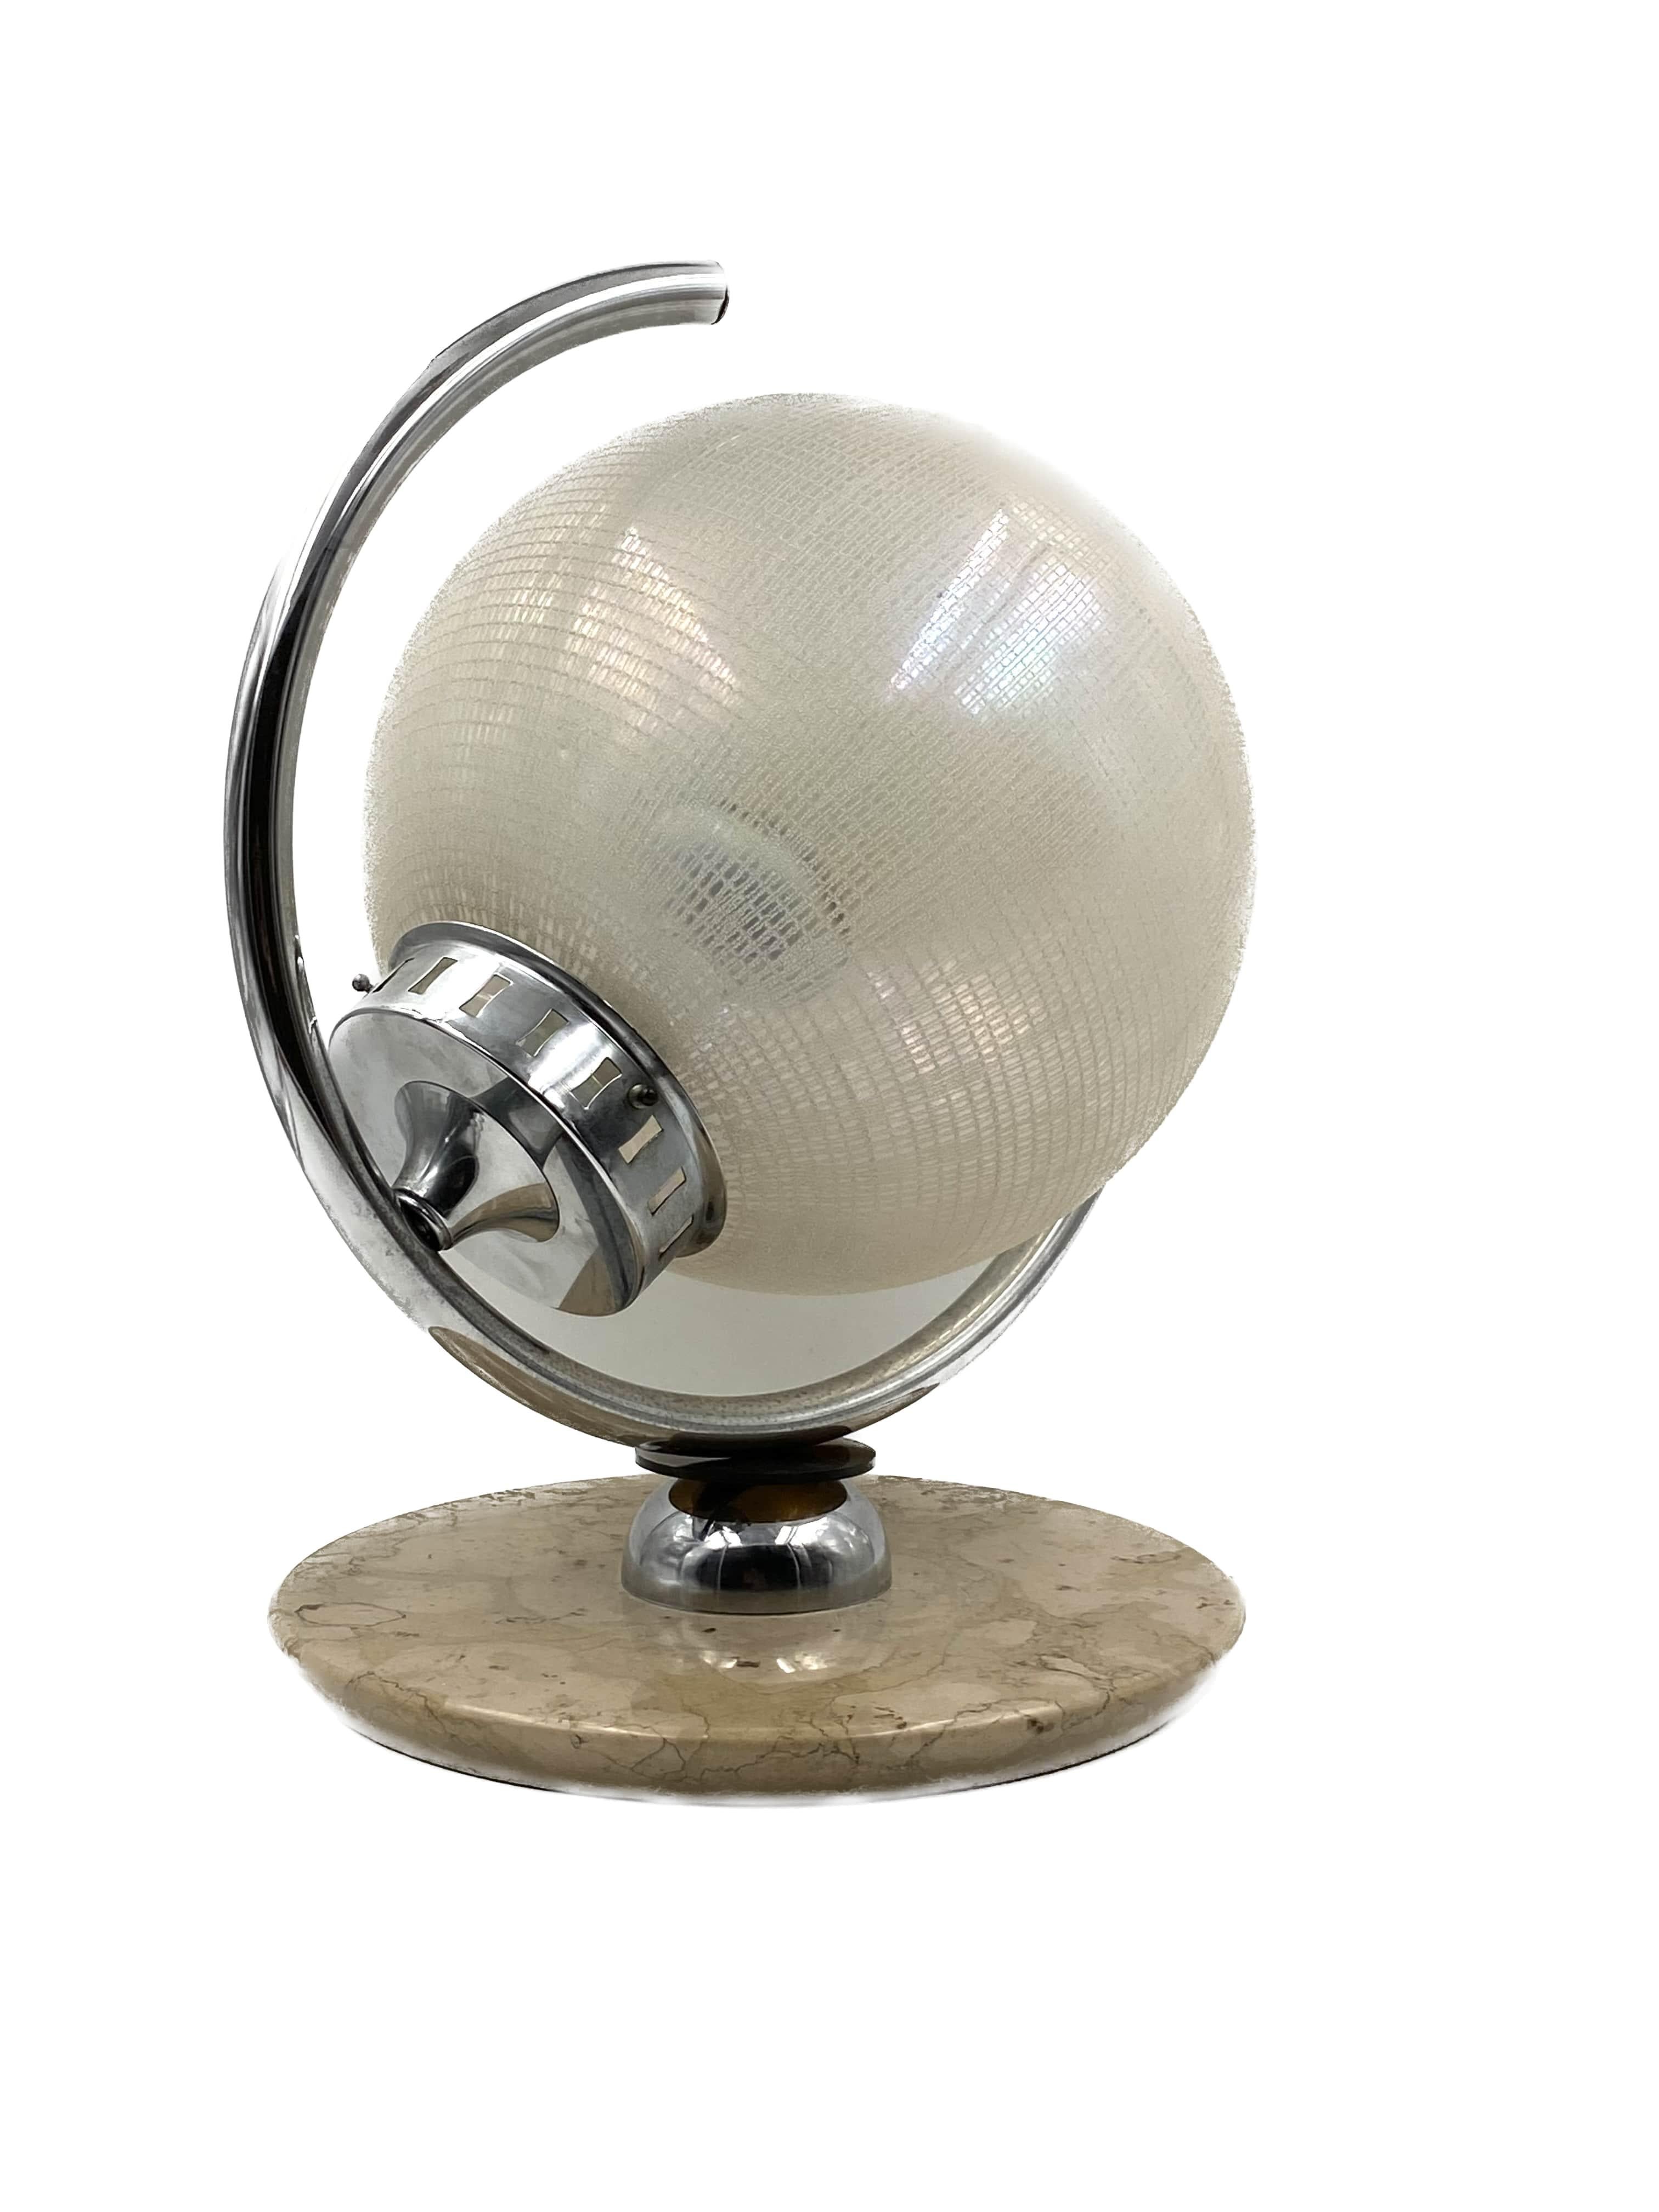 Murano glass spherical table lamp, Mazzega Italy 1970s For Sale 11